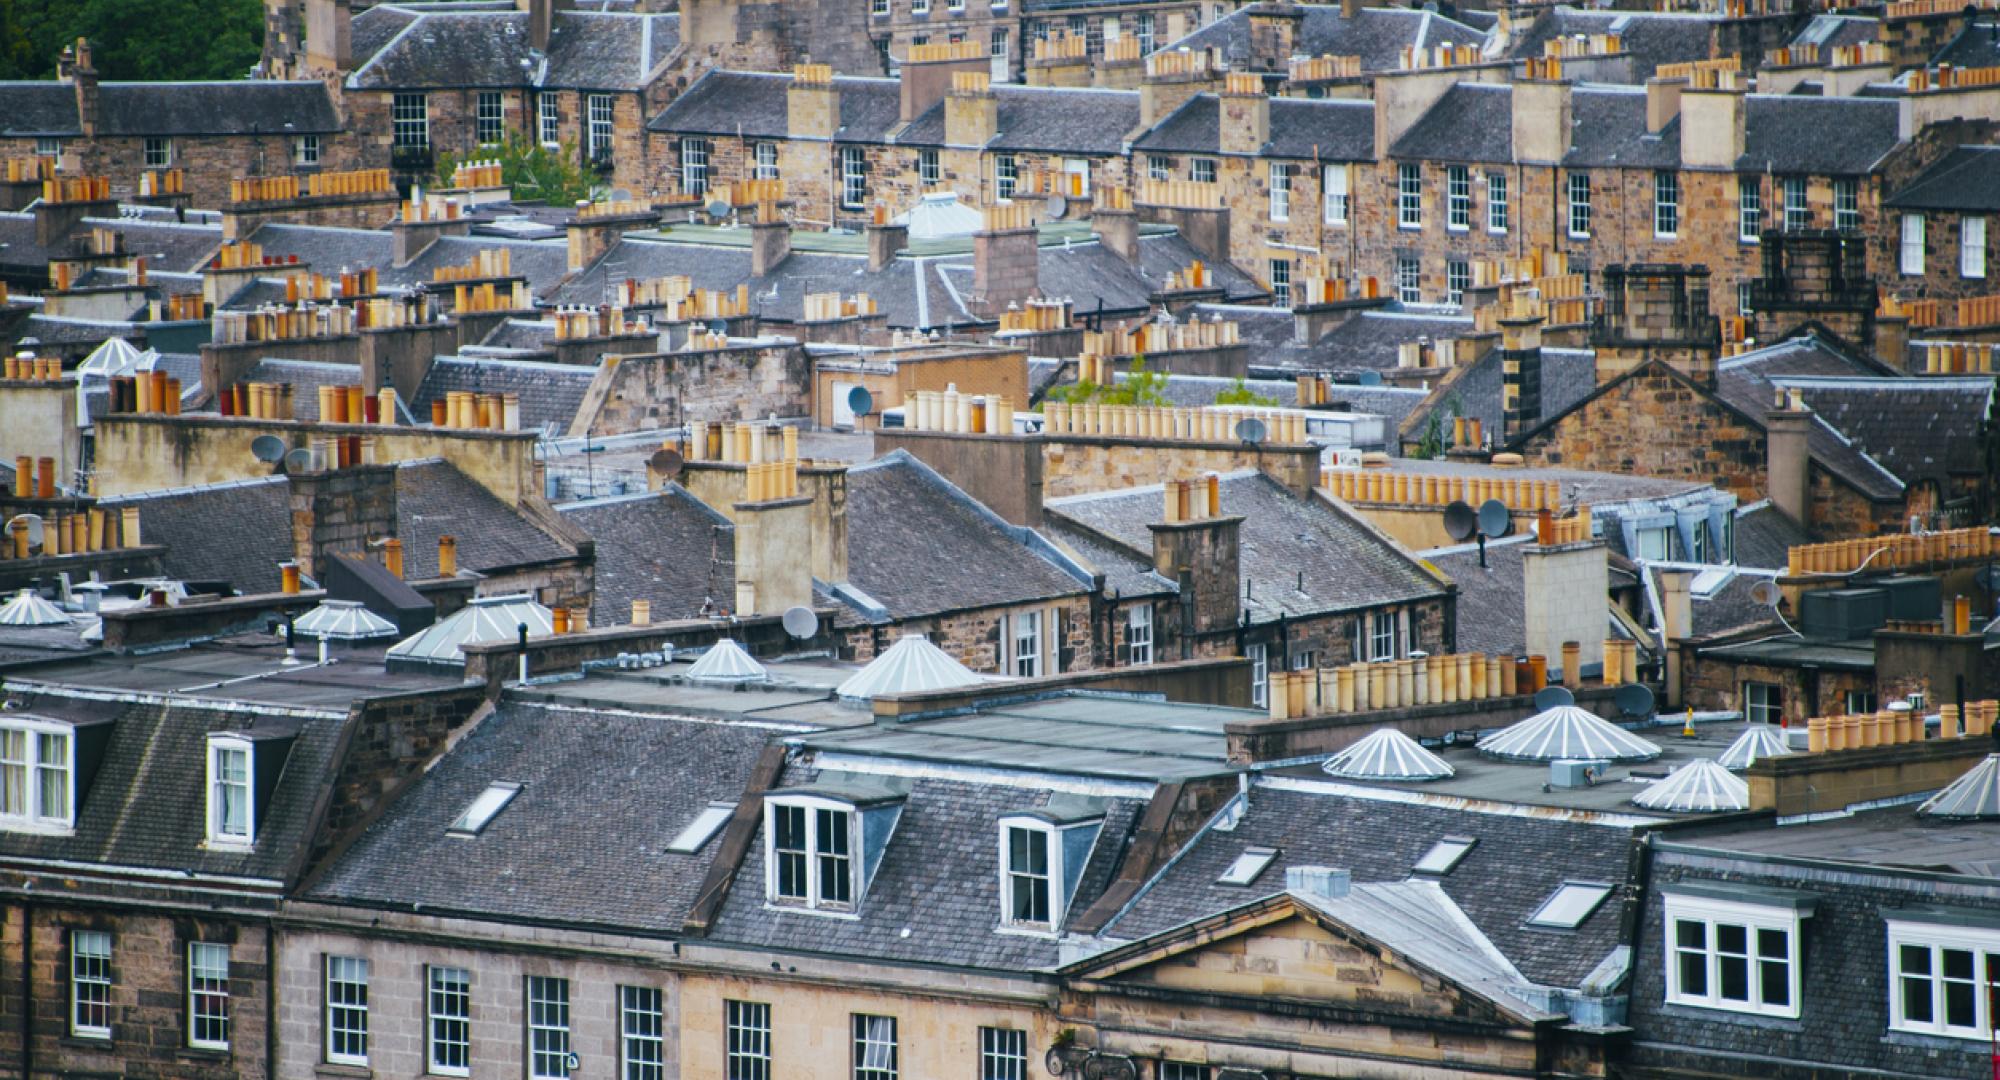 Aerial view of some houses in Edinburgh